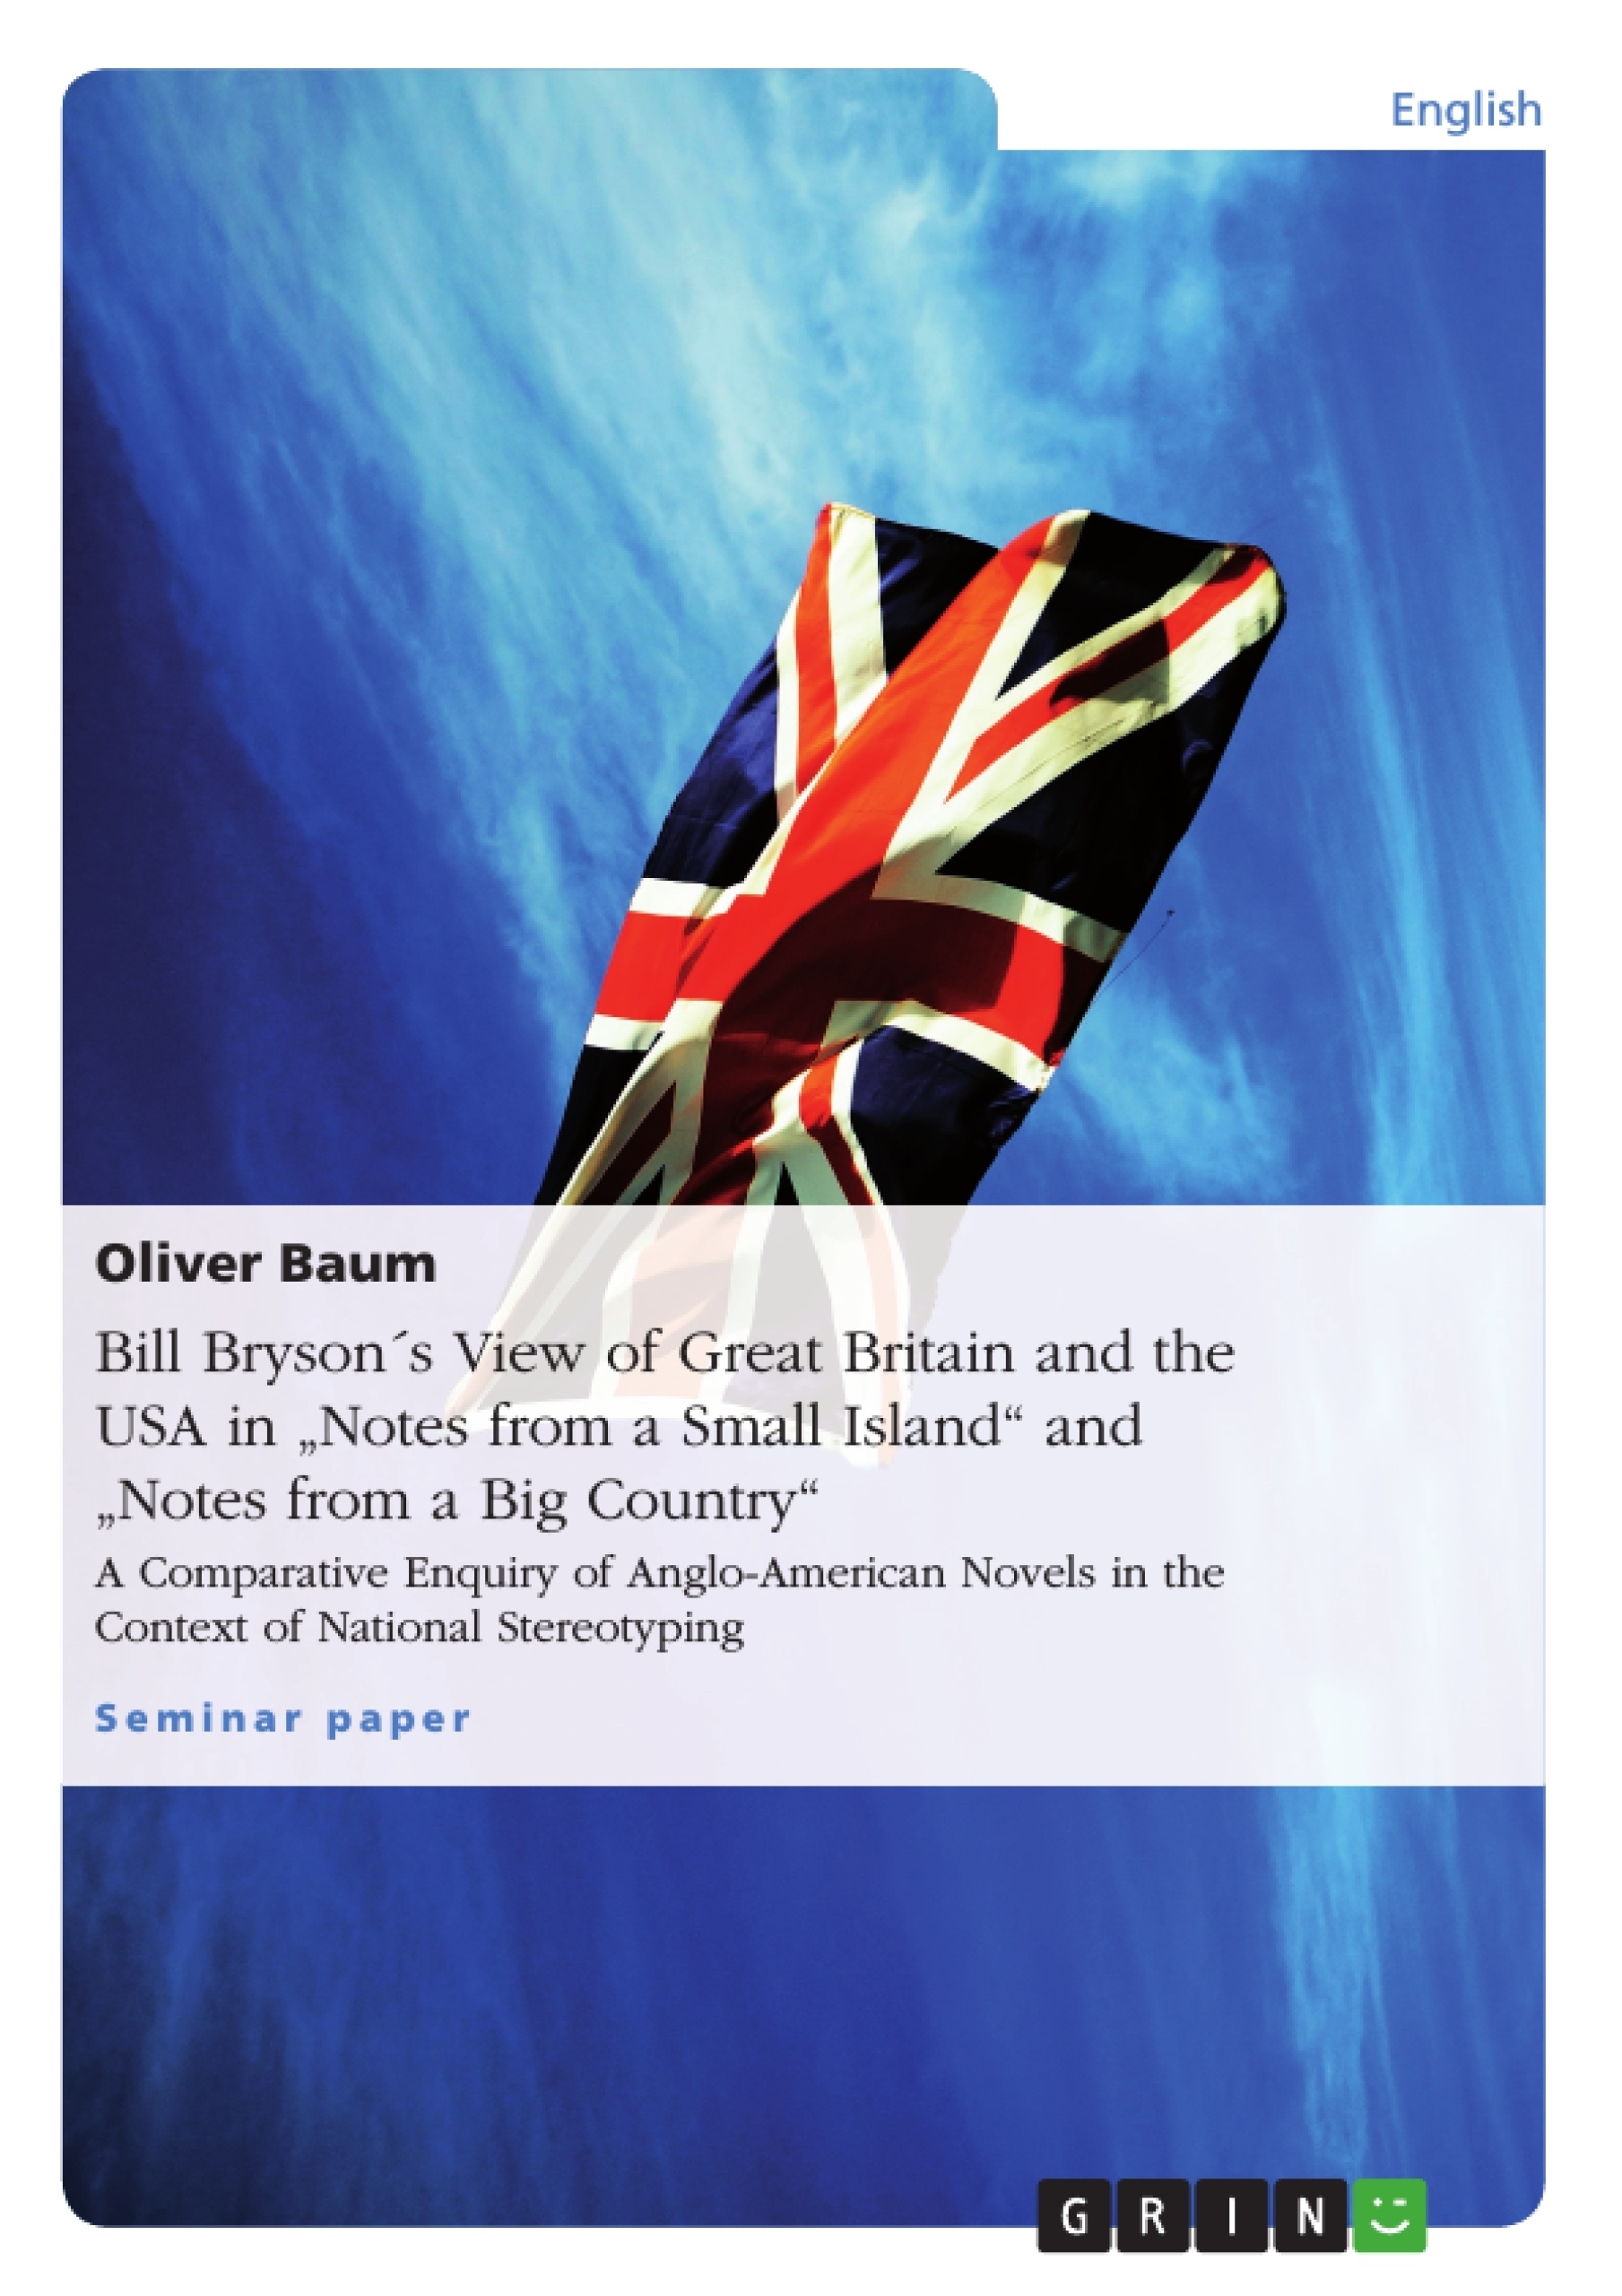 Title: Bill Bryson´s View of Great Britain and the USA in "Notes from a Small Island" and "Notes from a Big Country"